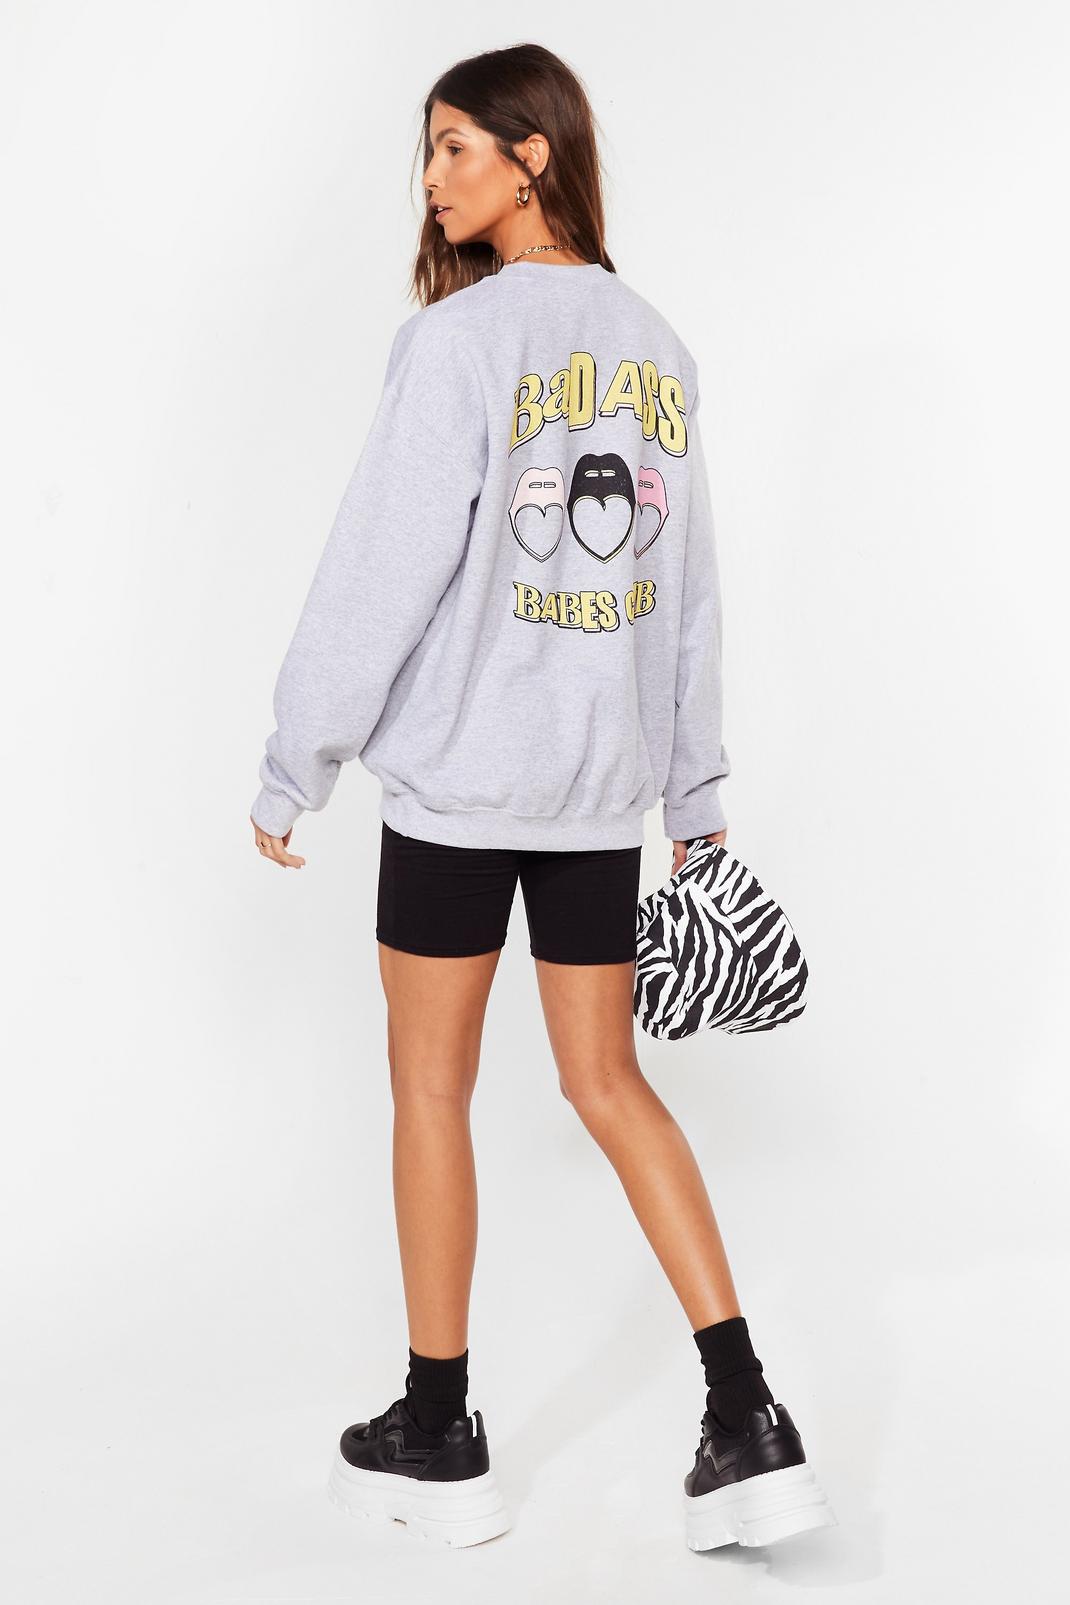 Badass Babes Club Relaxed Graphic Sweatshirt image number 1